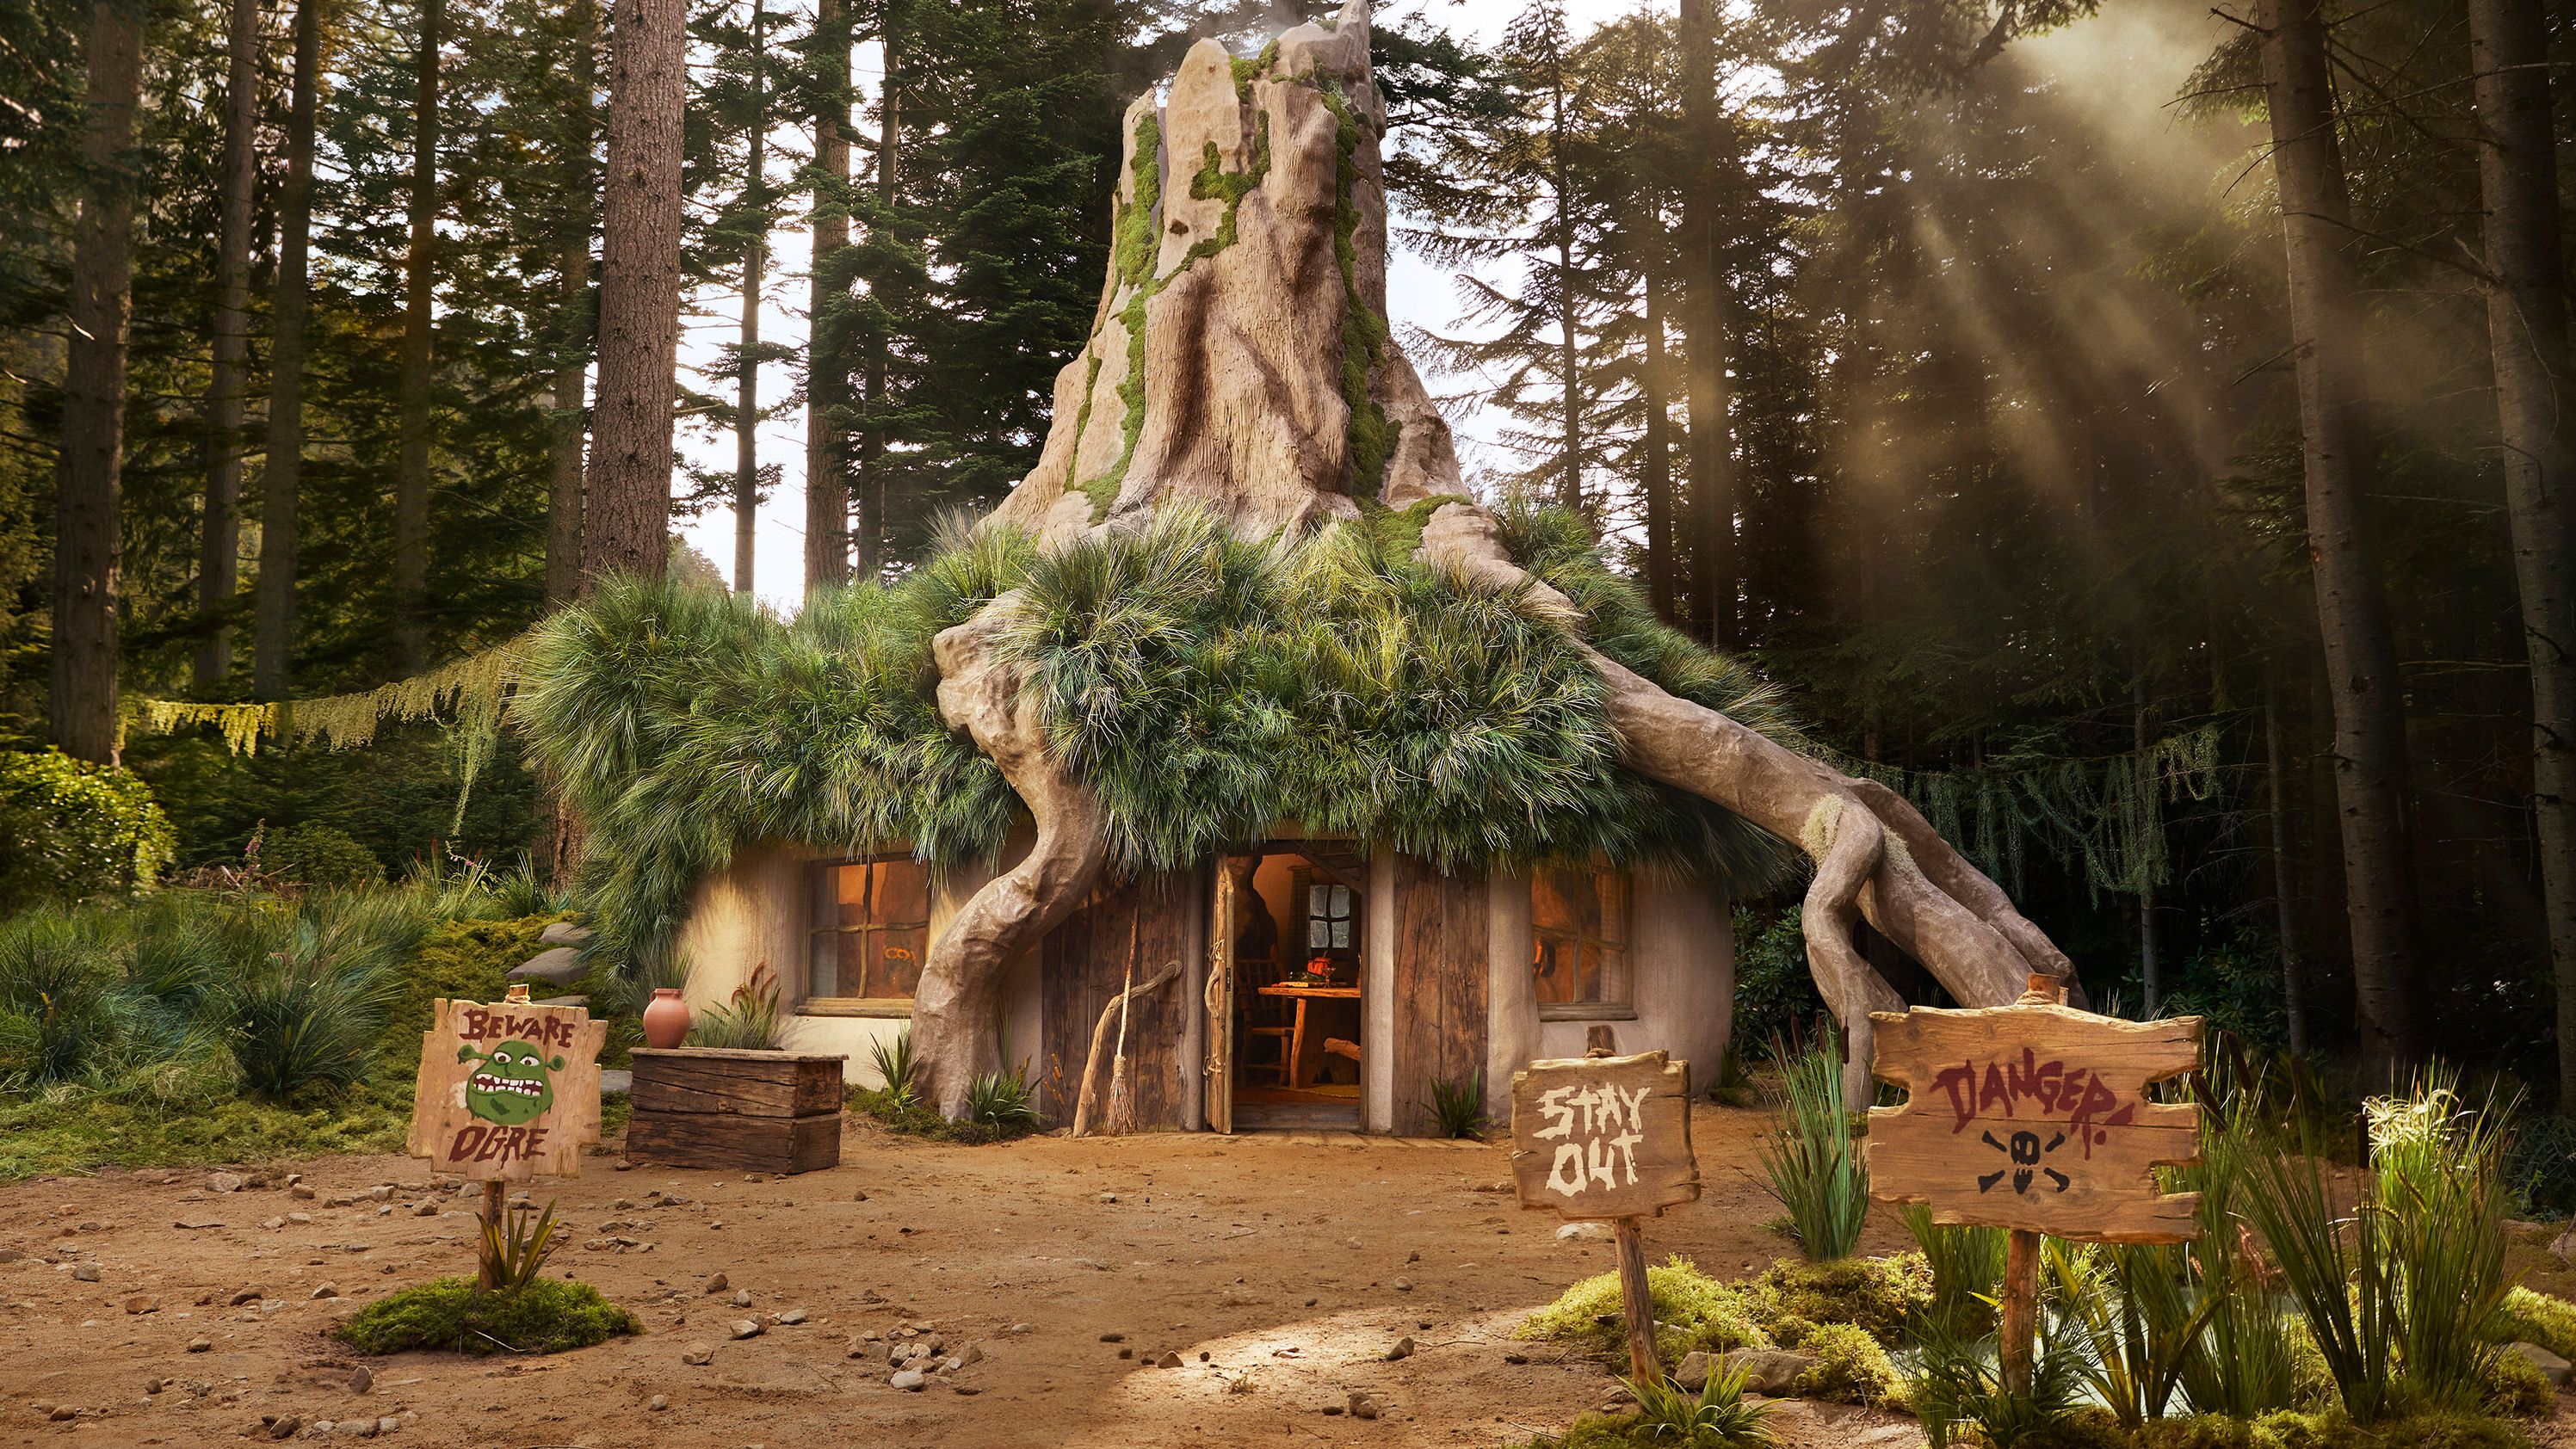 Shrek's 'swamp' now available to rent on Airbnb